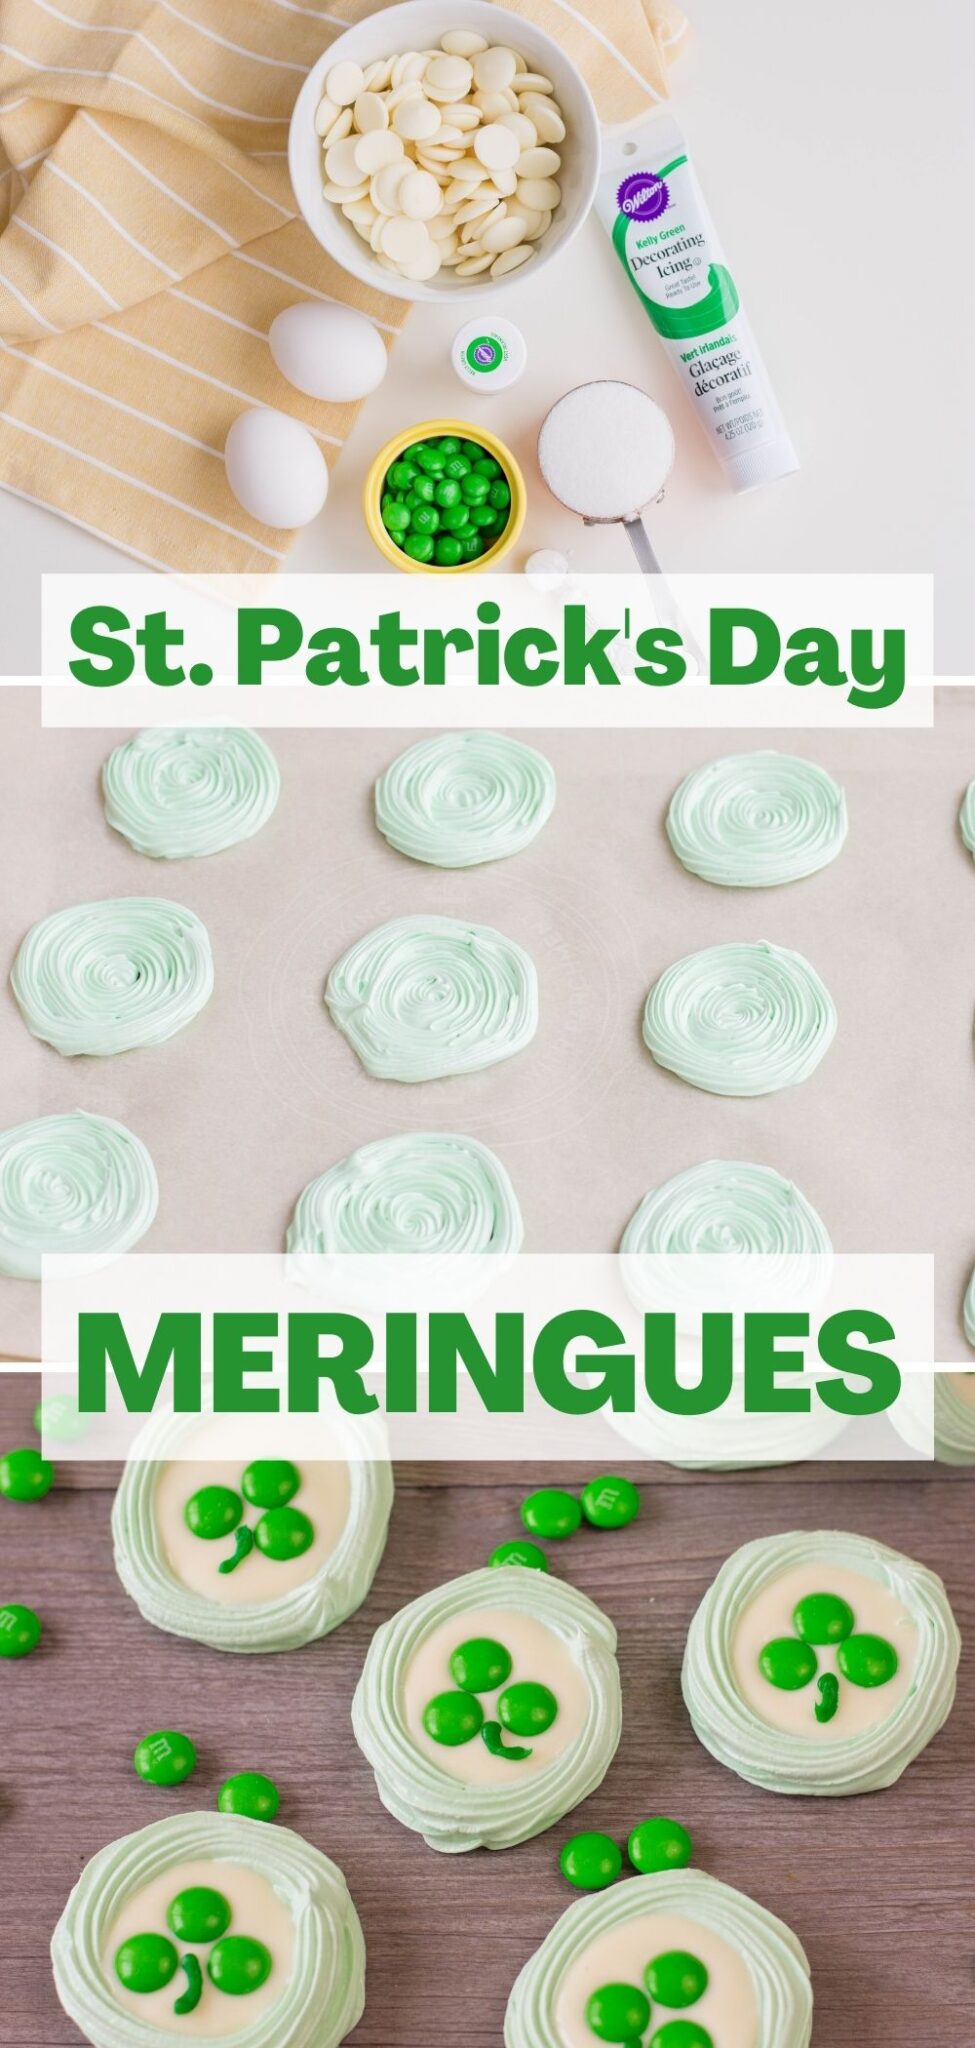 These St. Patrick’s Day Meringue Cookies are the perfect, light and airy goodies to help you celebrate this year. #stpatricksday #meringue #cookies via @wondermomwannab